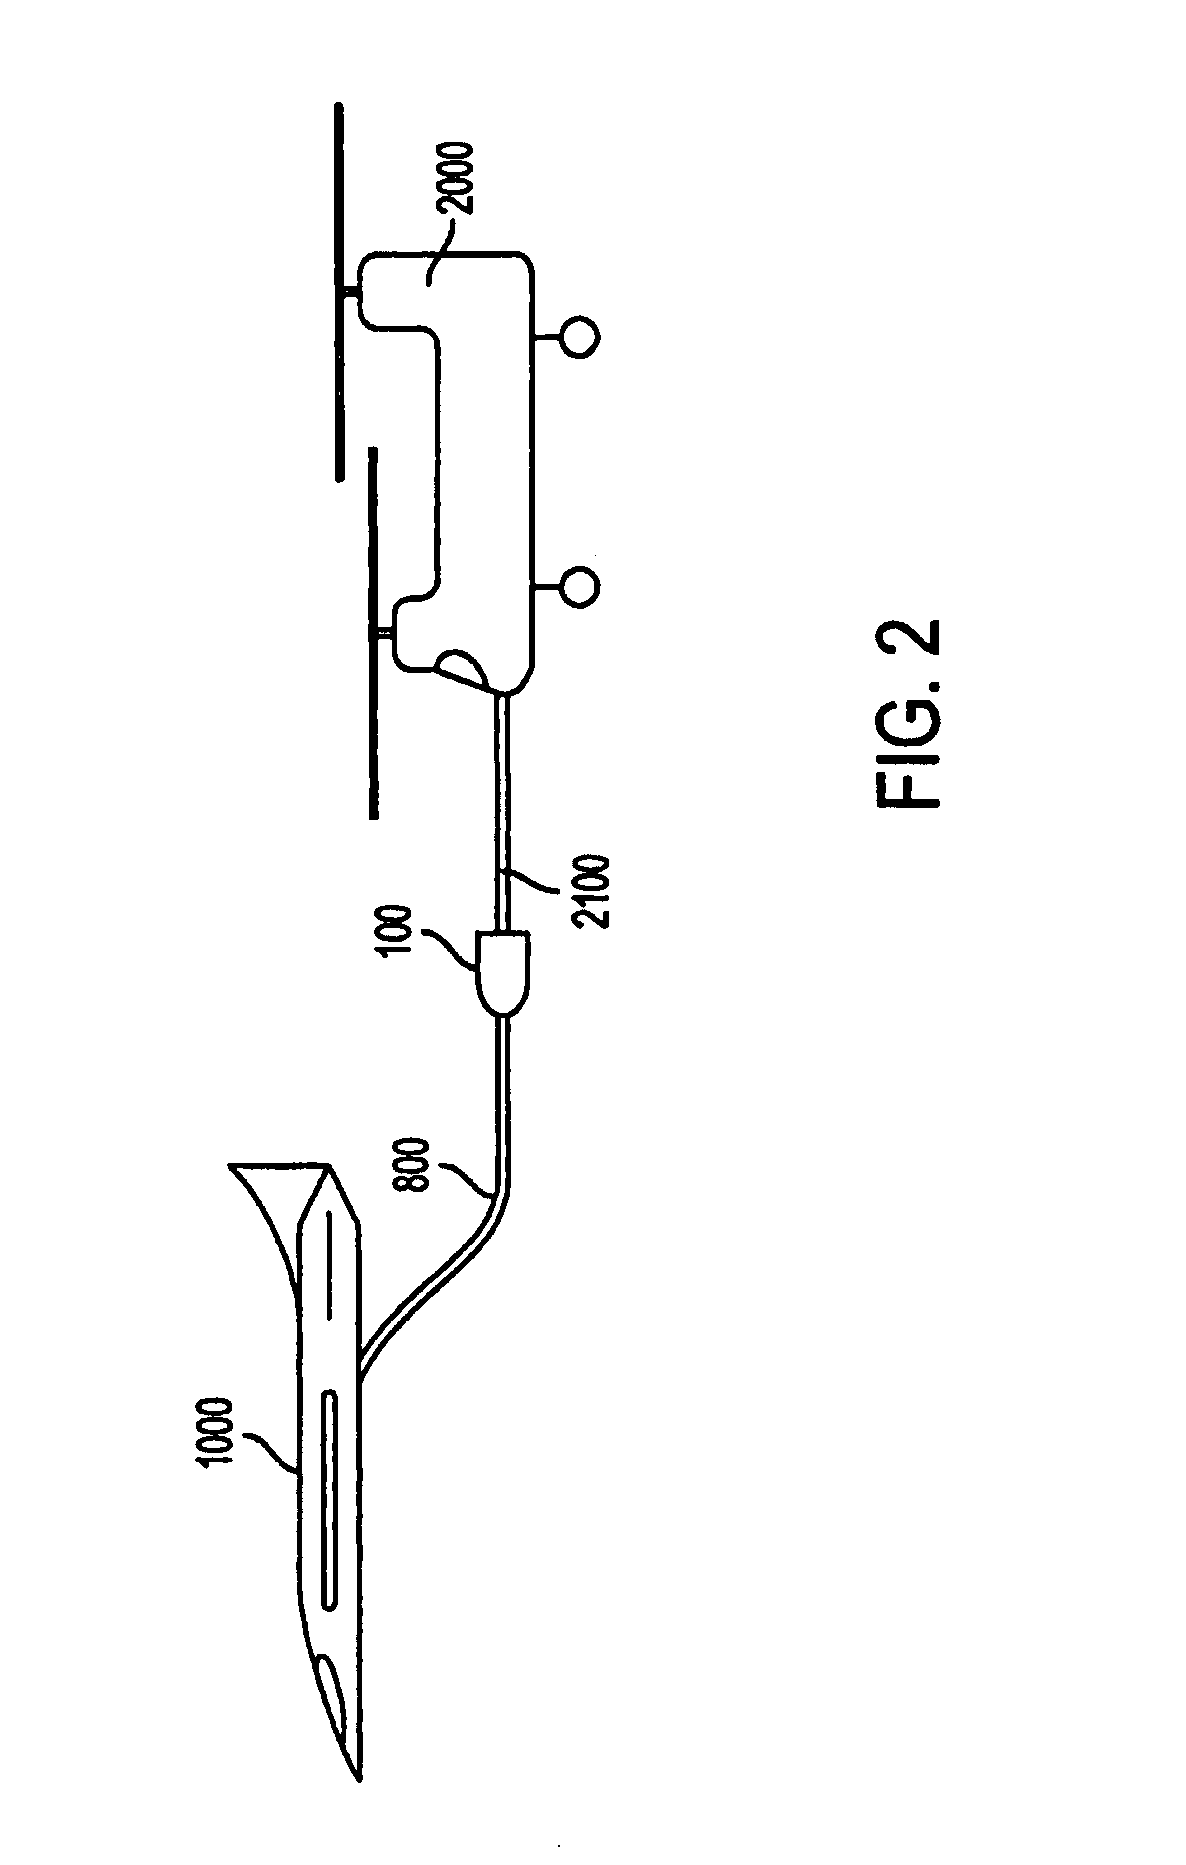 Active stabilization of a refueling drogue